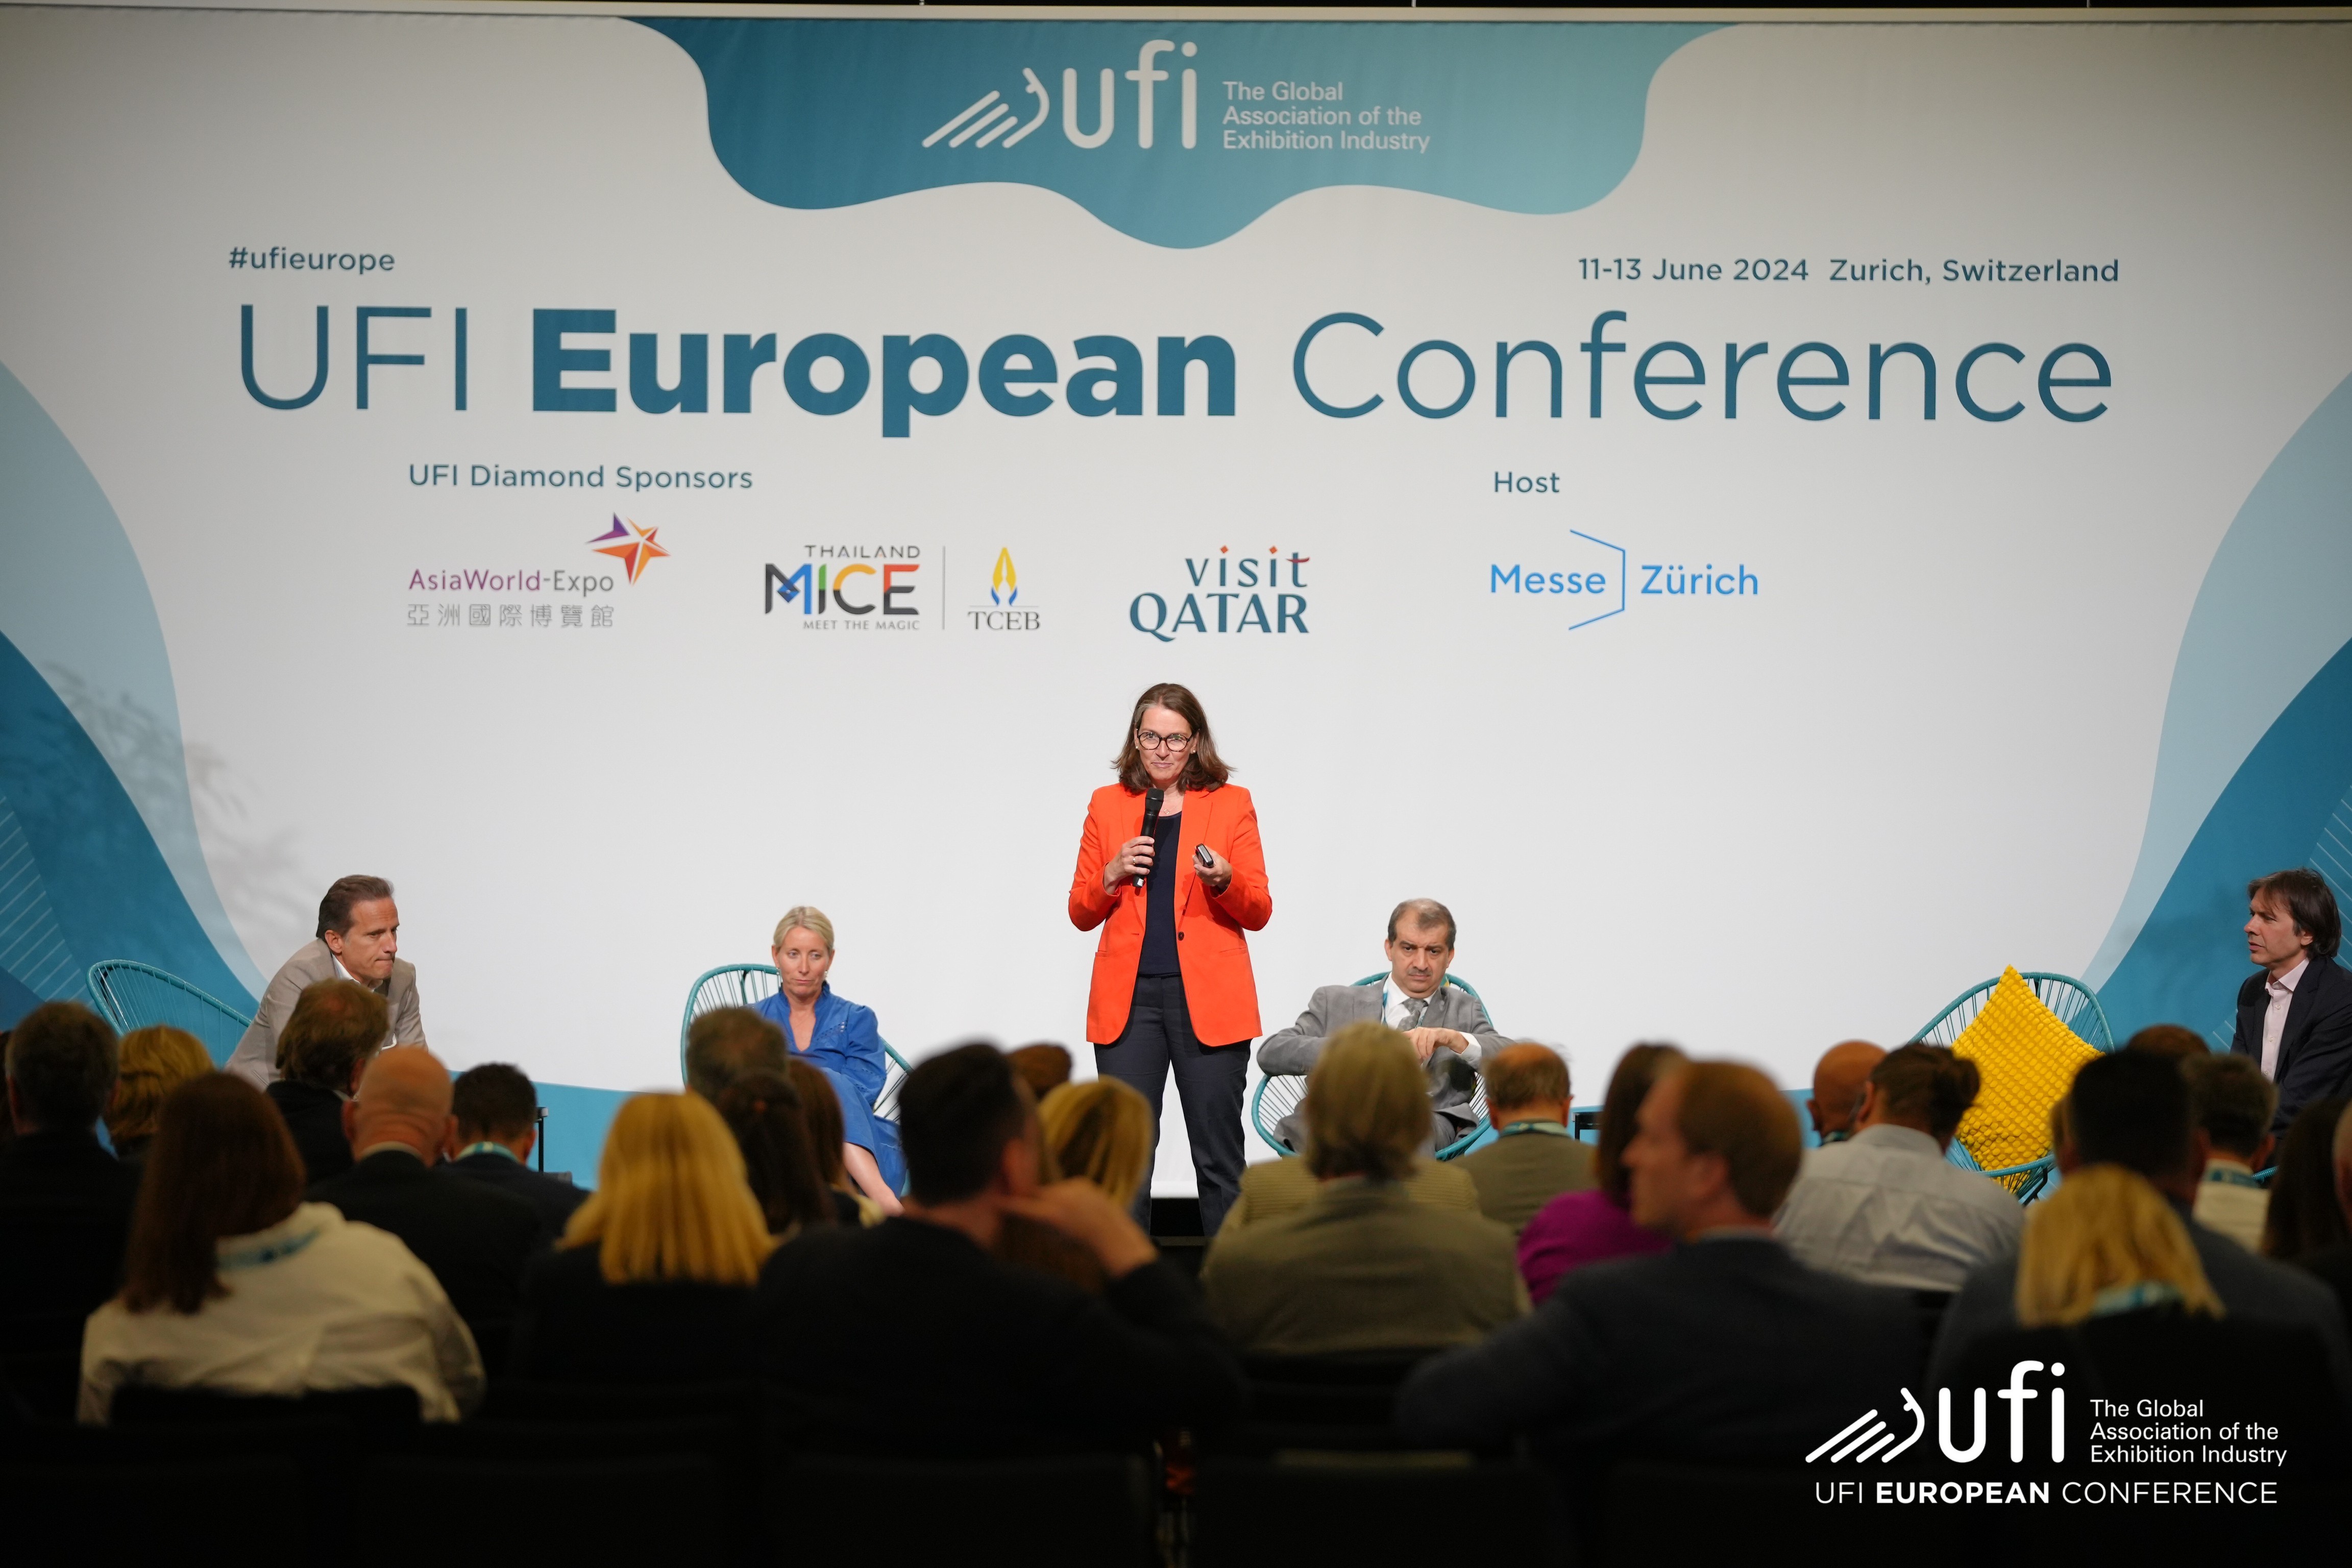 Shaping the future: Insights from UFI European Conference 2024